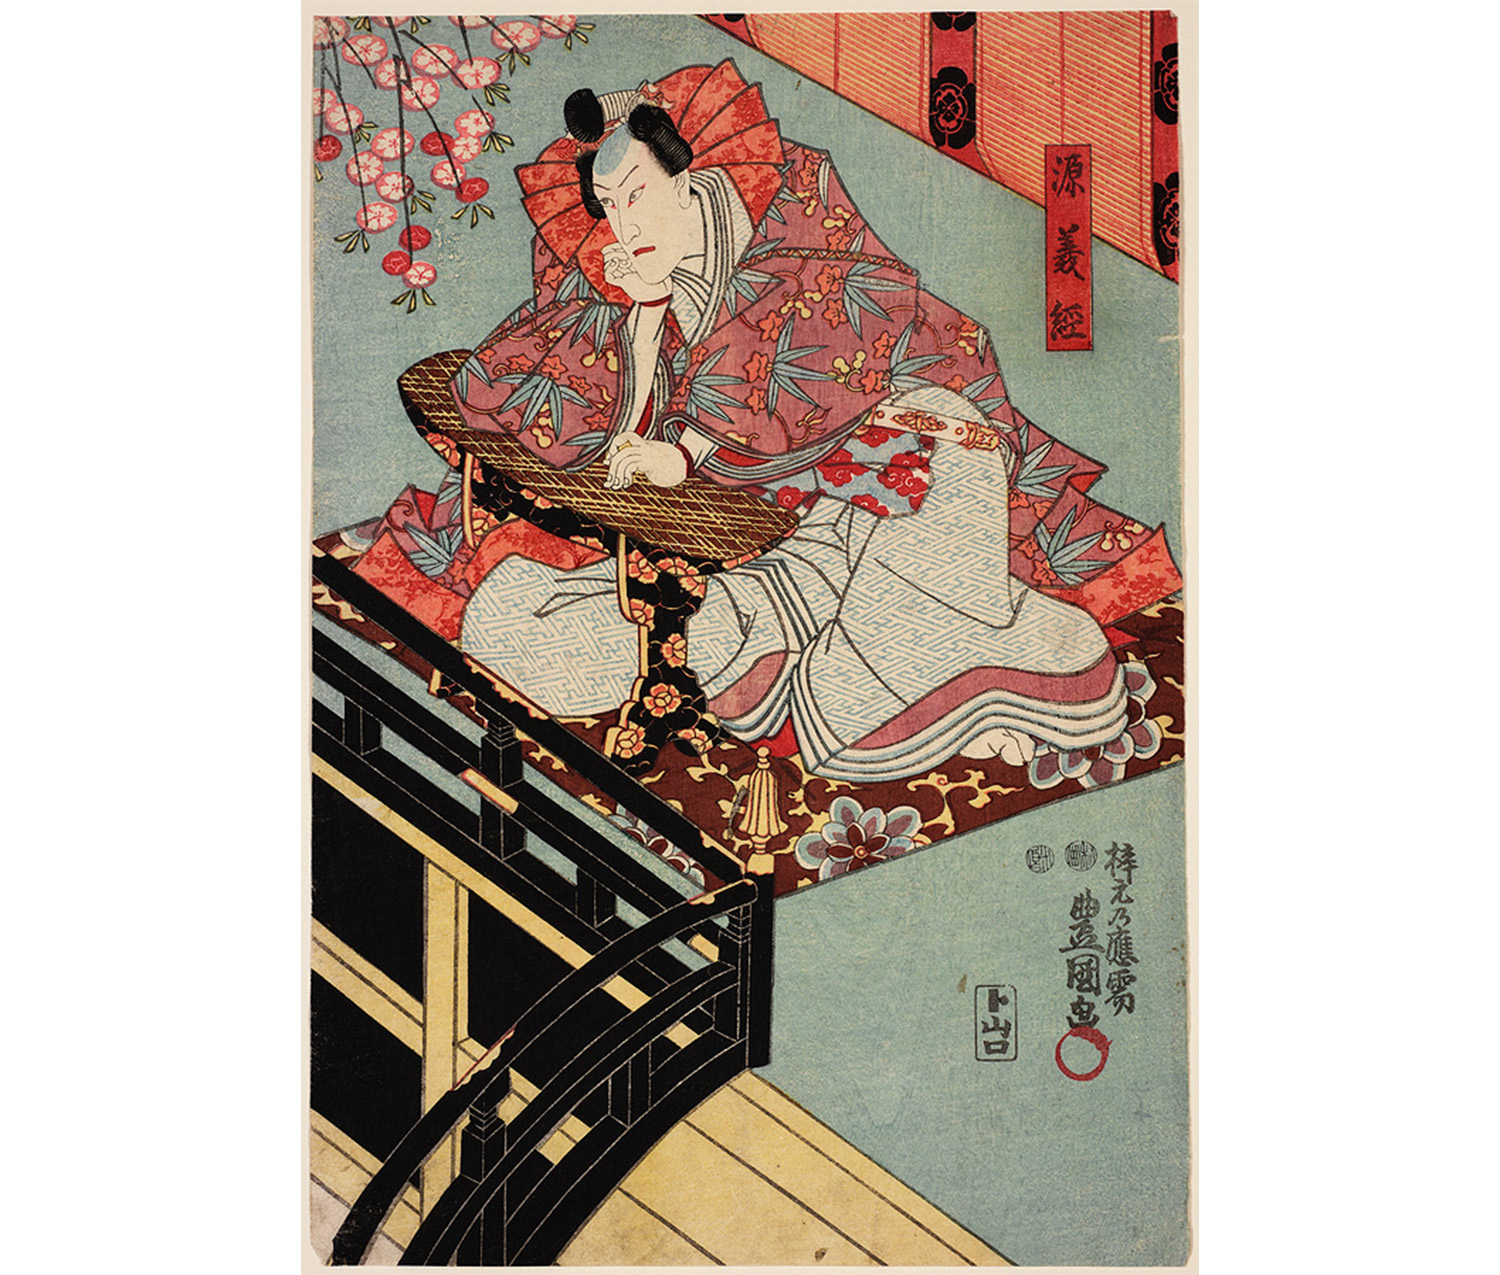 Man seated on a brown cushion wearing an elaborate robe, leaning on a lacquered table; branches of a blooming cherry tree upper left corner